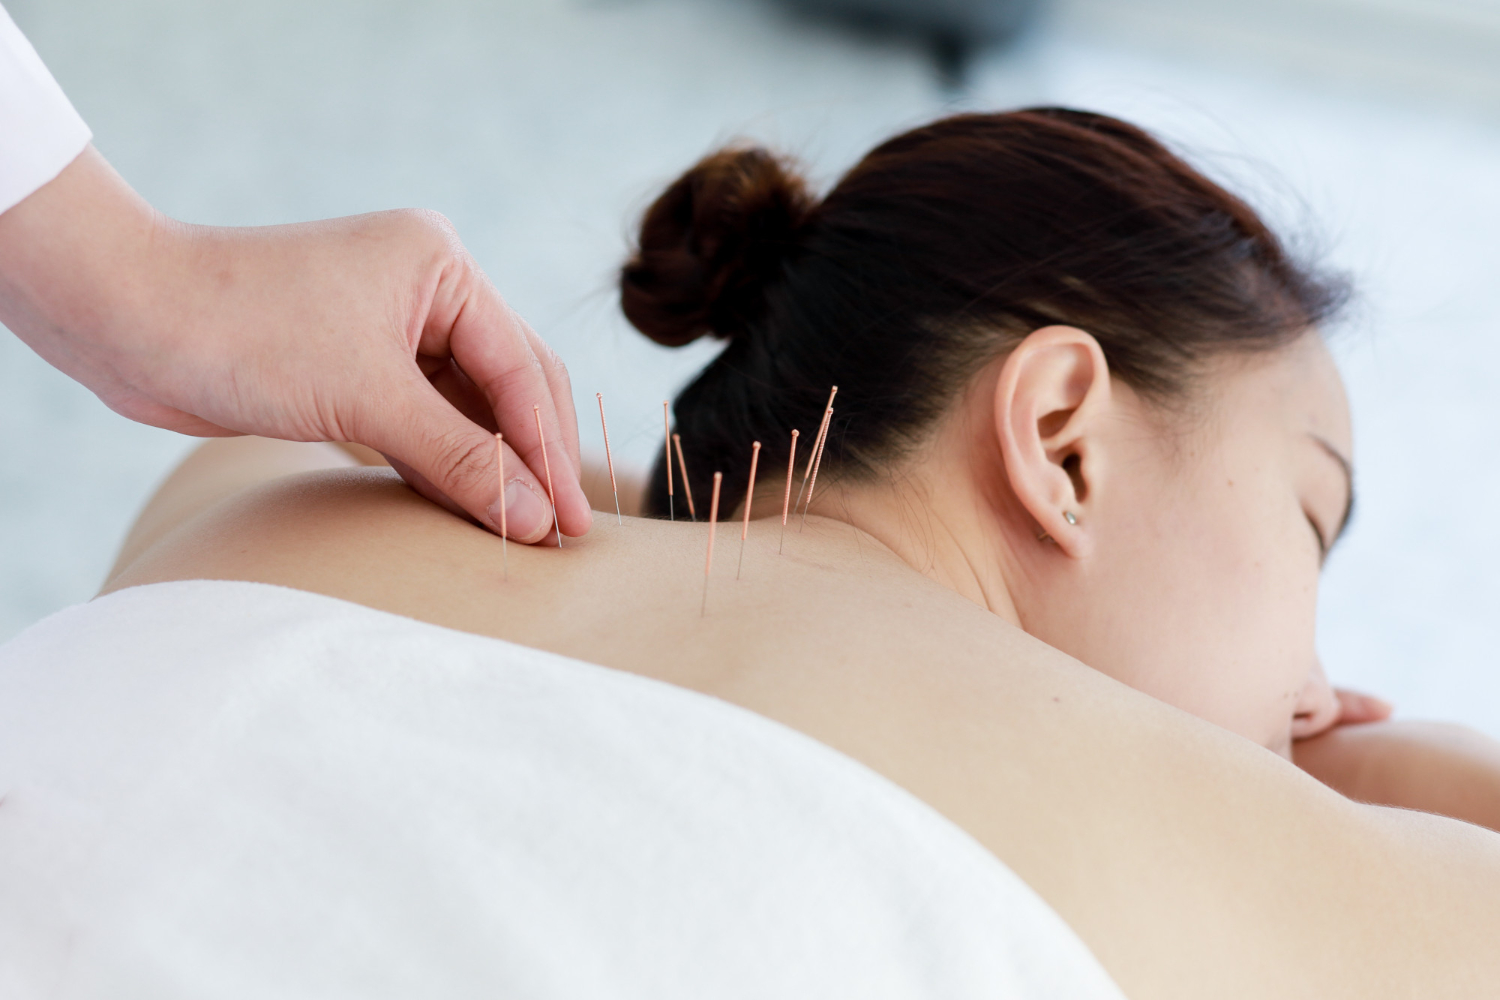 Acupuncture vs Dry Needling | What Are  The Benefits Of Each?